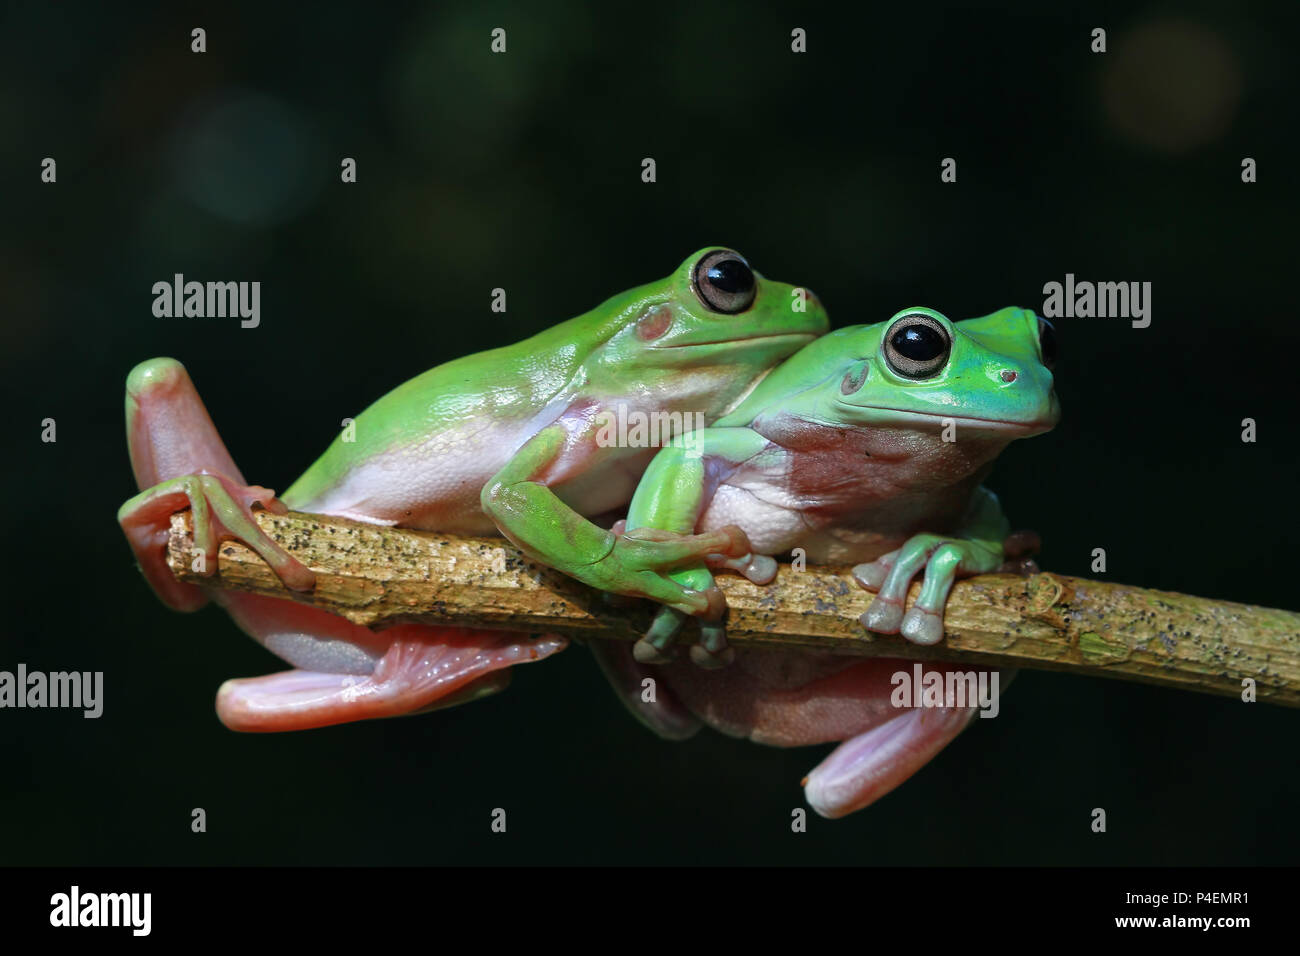 Two Dumpy tree frogs on a branch Stock Photo